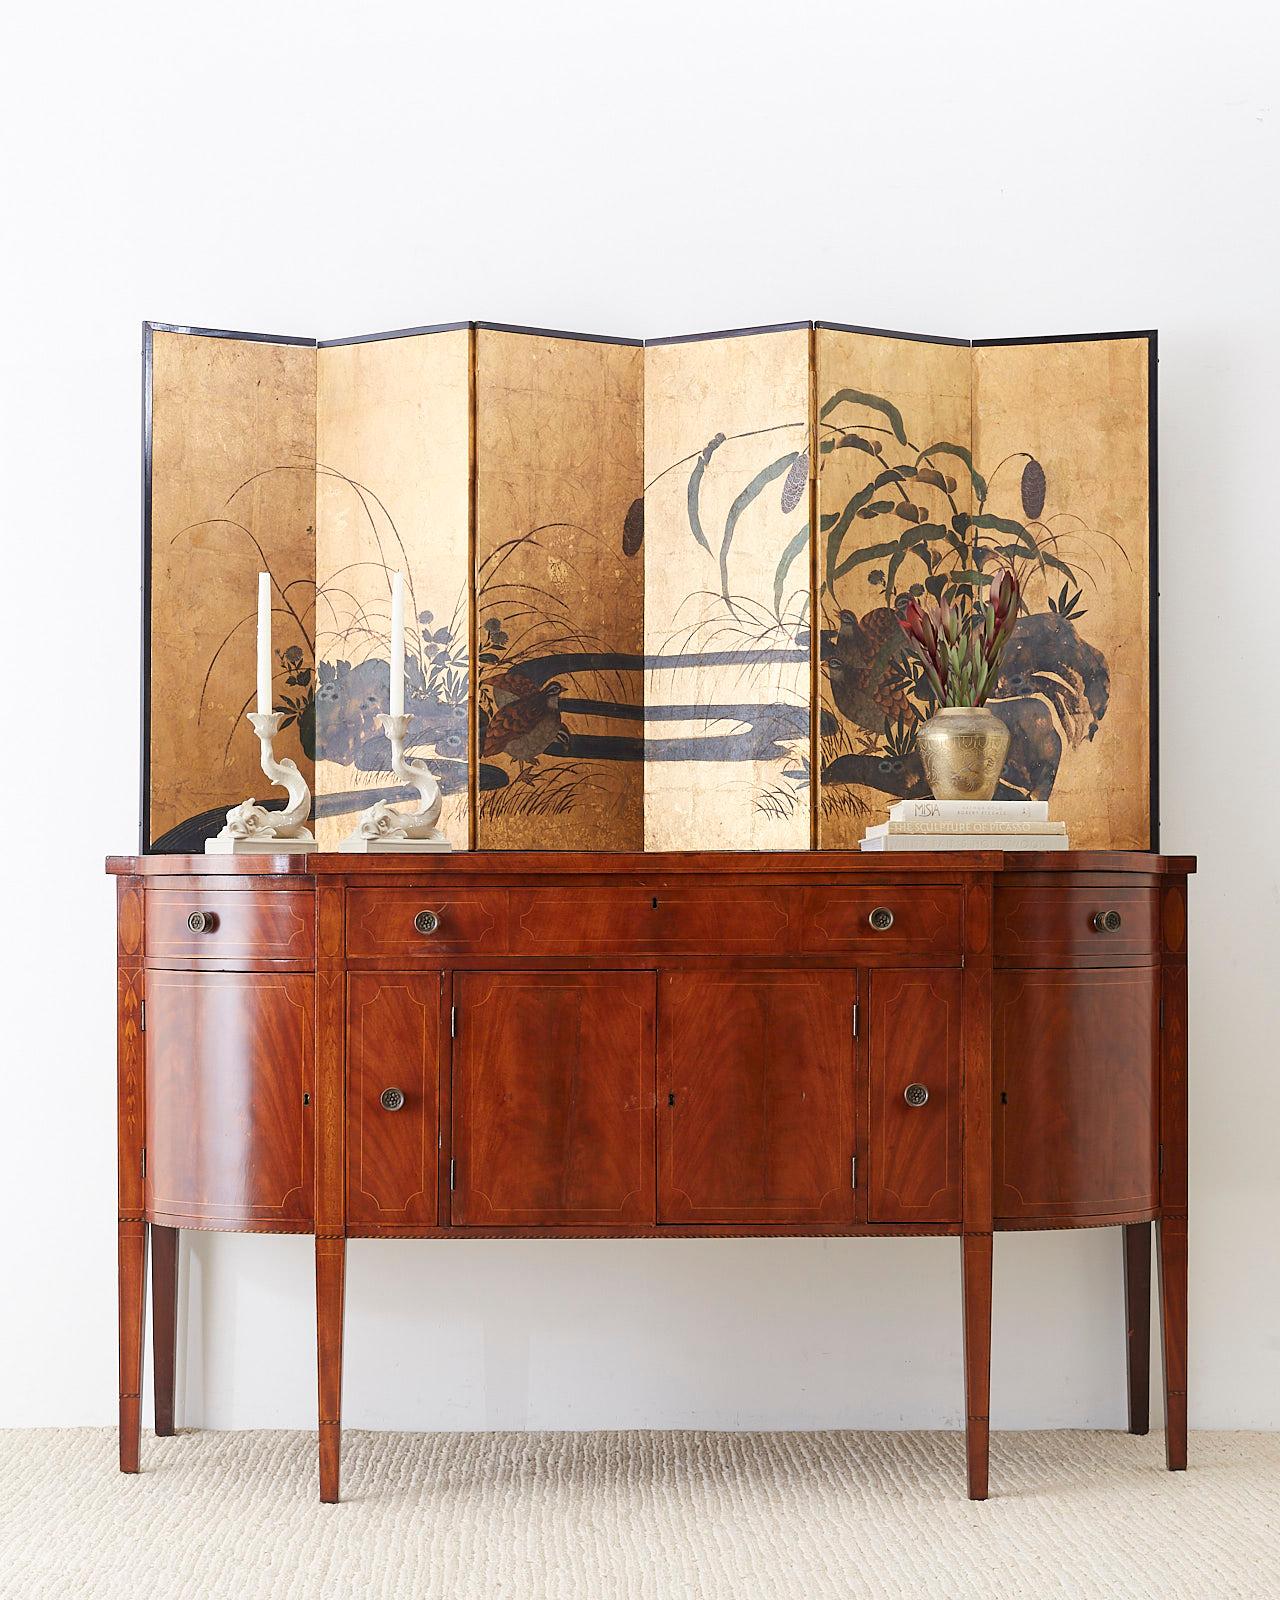 Distinctive Japanese six-panel screen depicting a meandering river landscape with quail among millet grasses and rocks. Painted in the Rimpa school style with ink and color pigments over thick gold leaf squares. Set in a black lacquered wood frame.